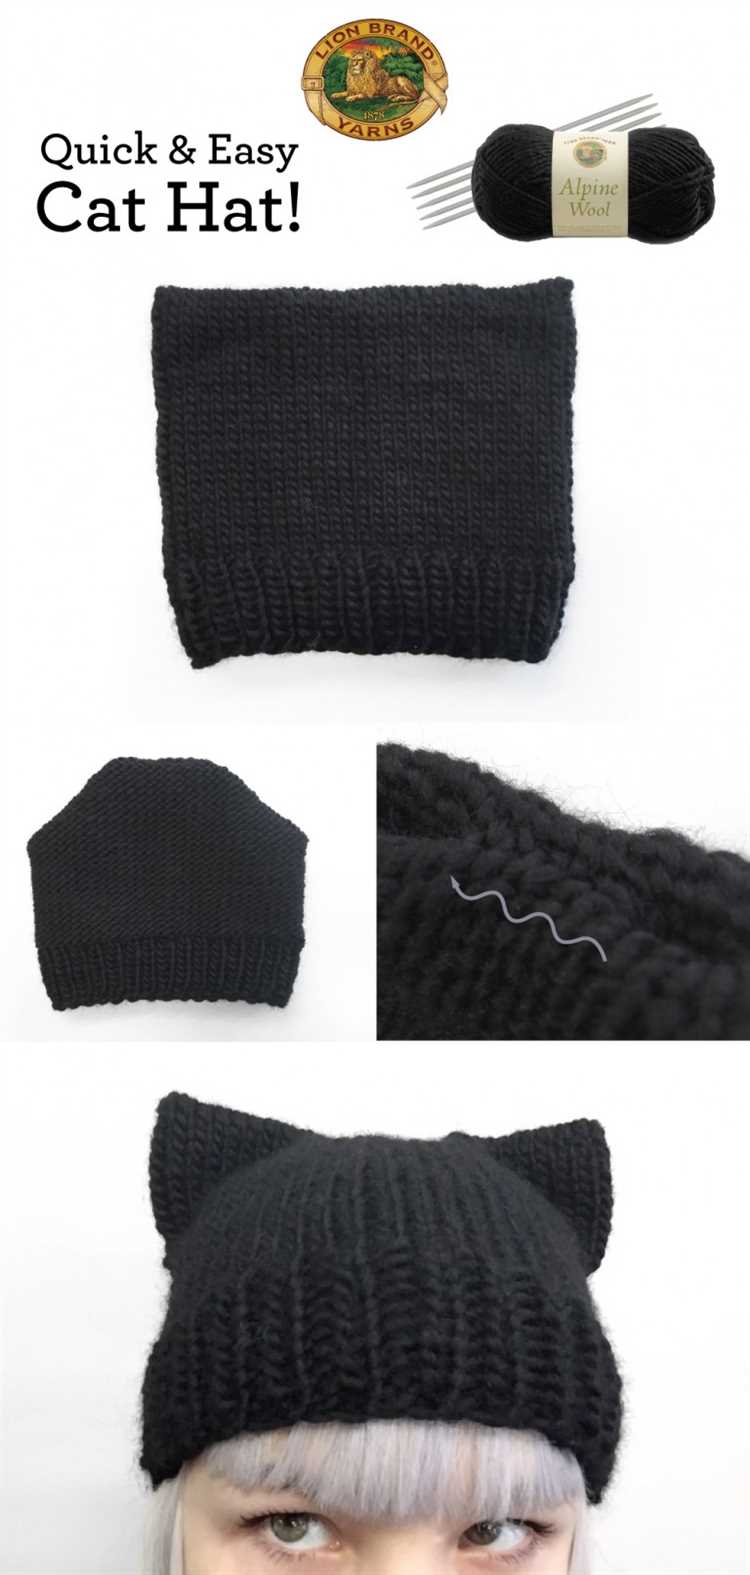 Learn how to knit a cat hat